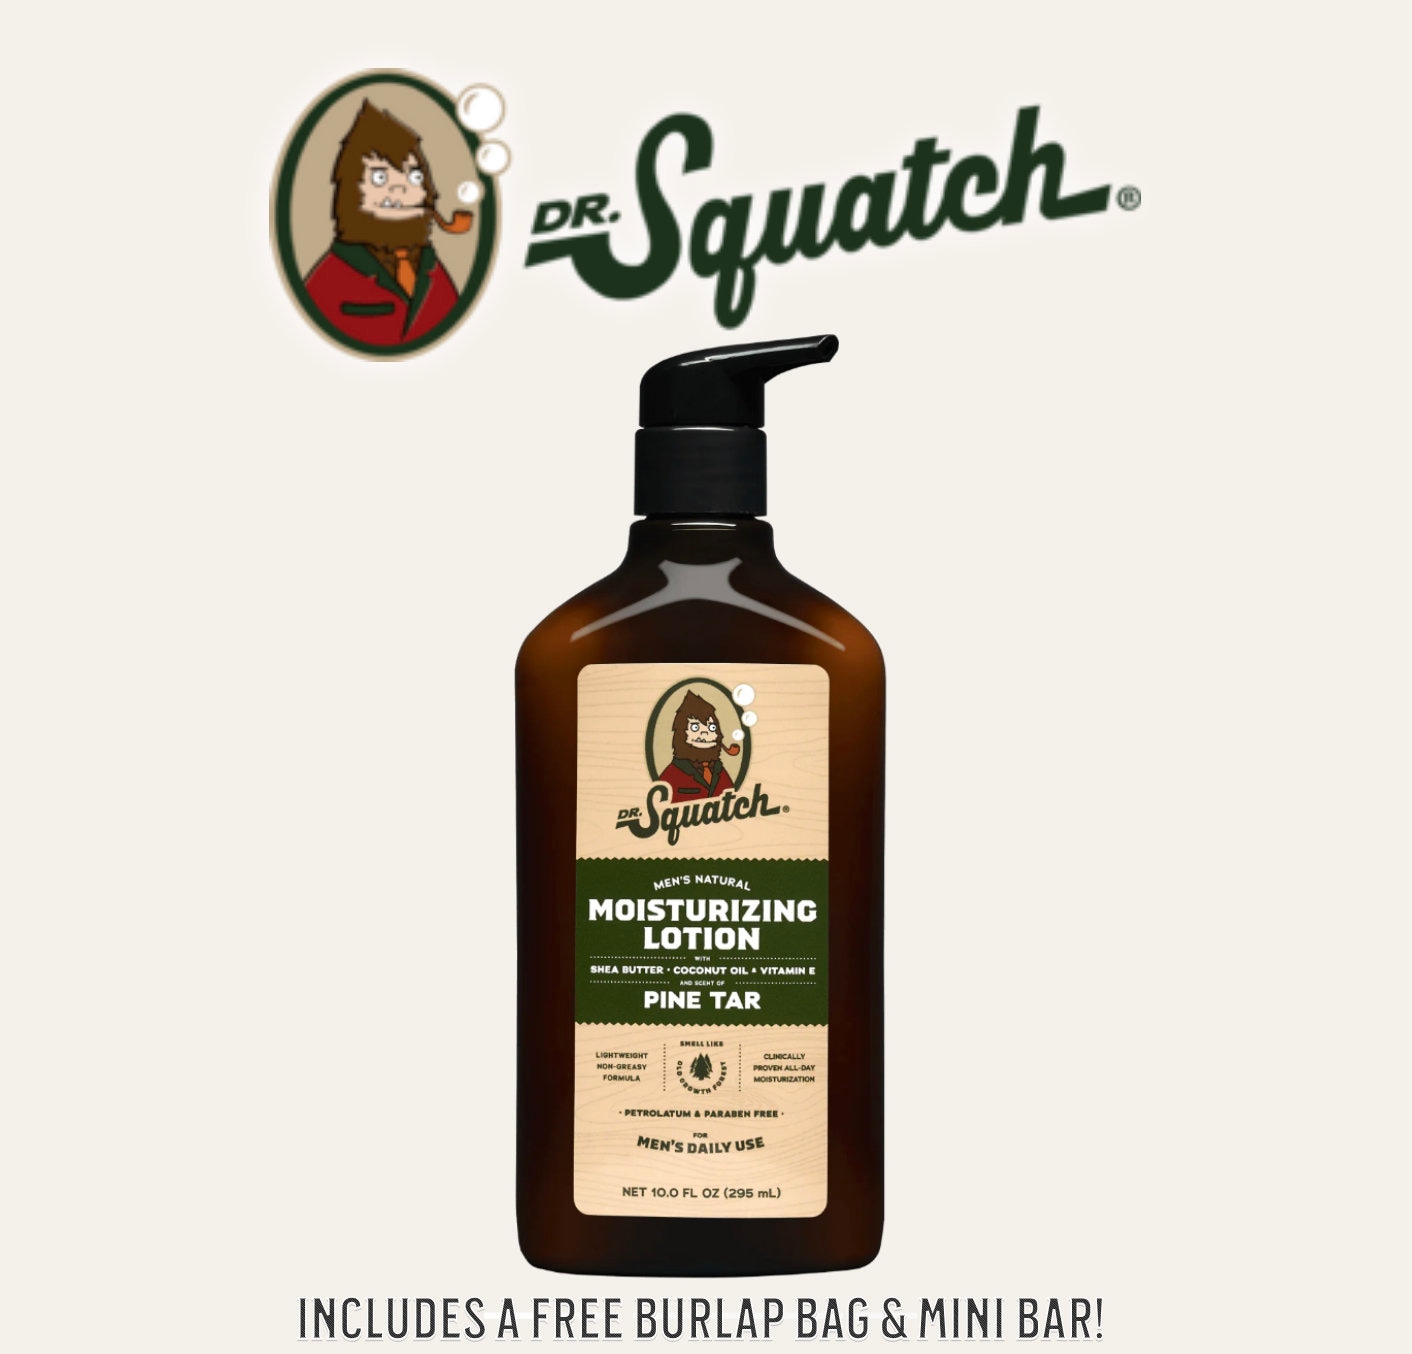 Pine Tar Candle - Dr. Squatch 